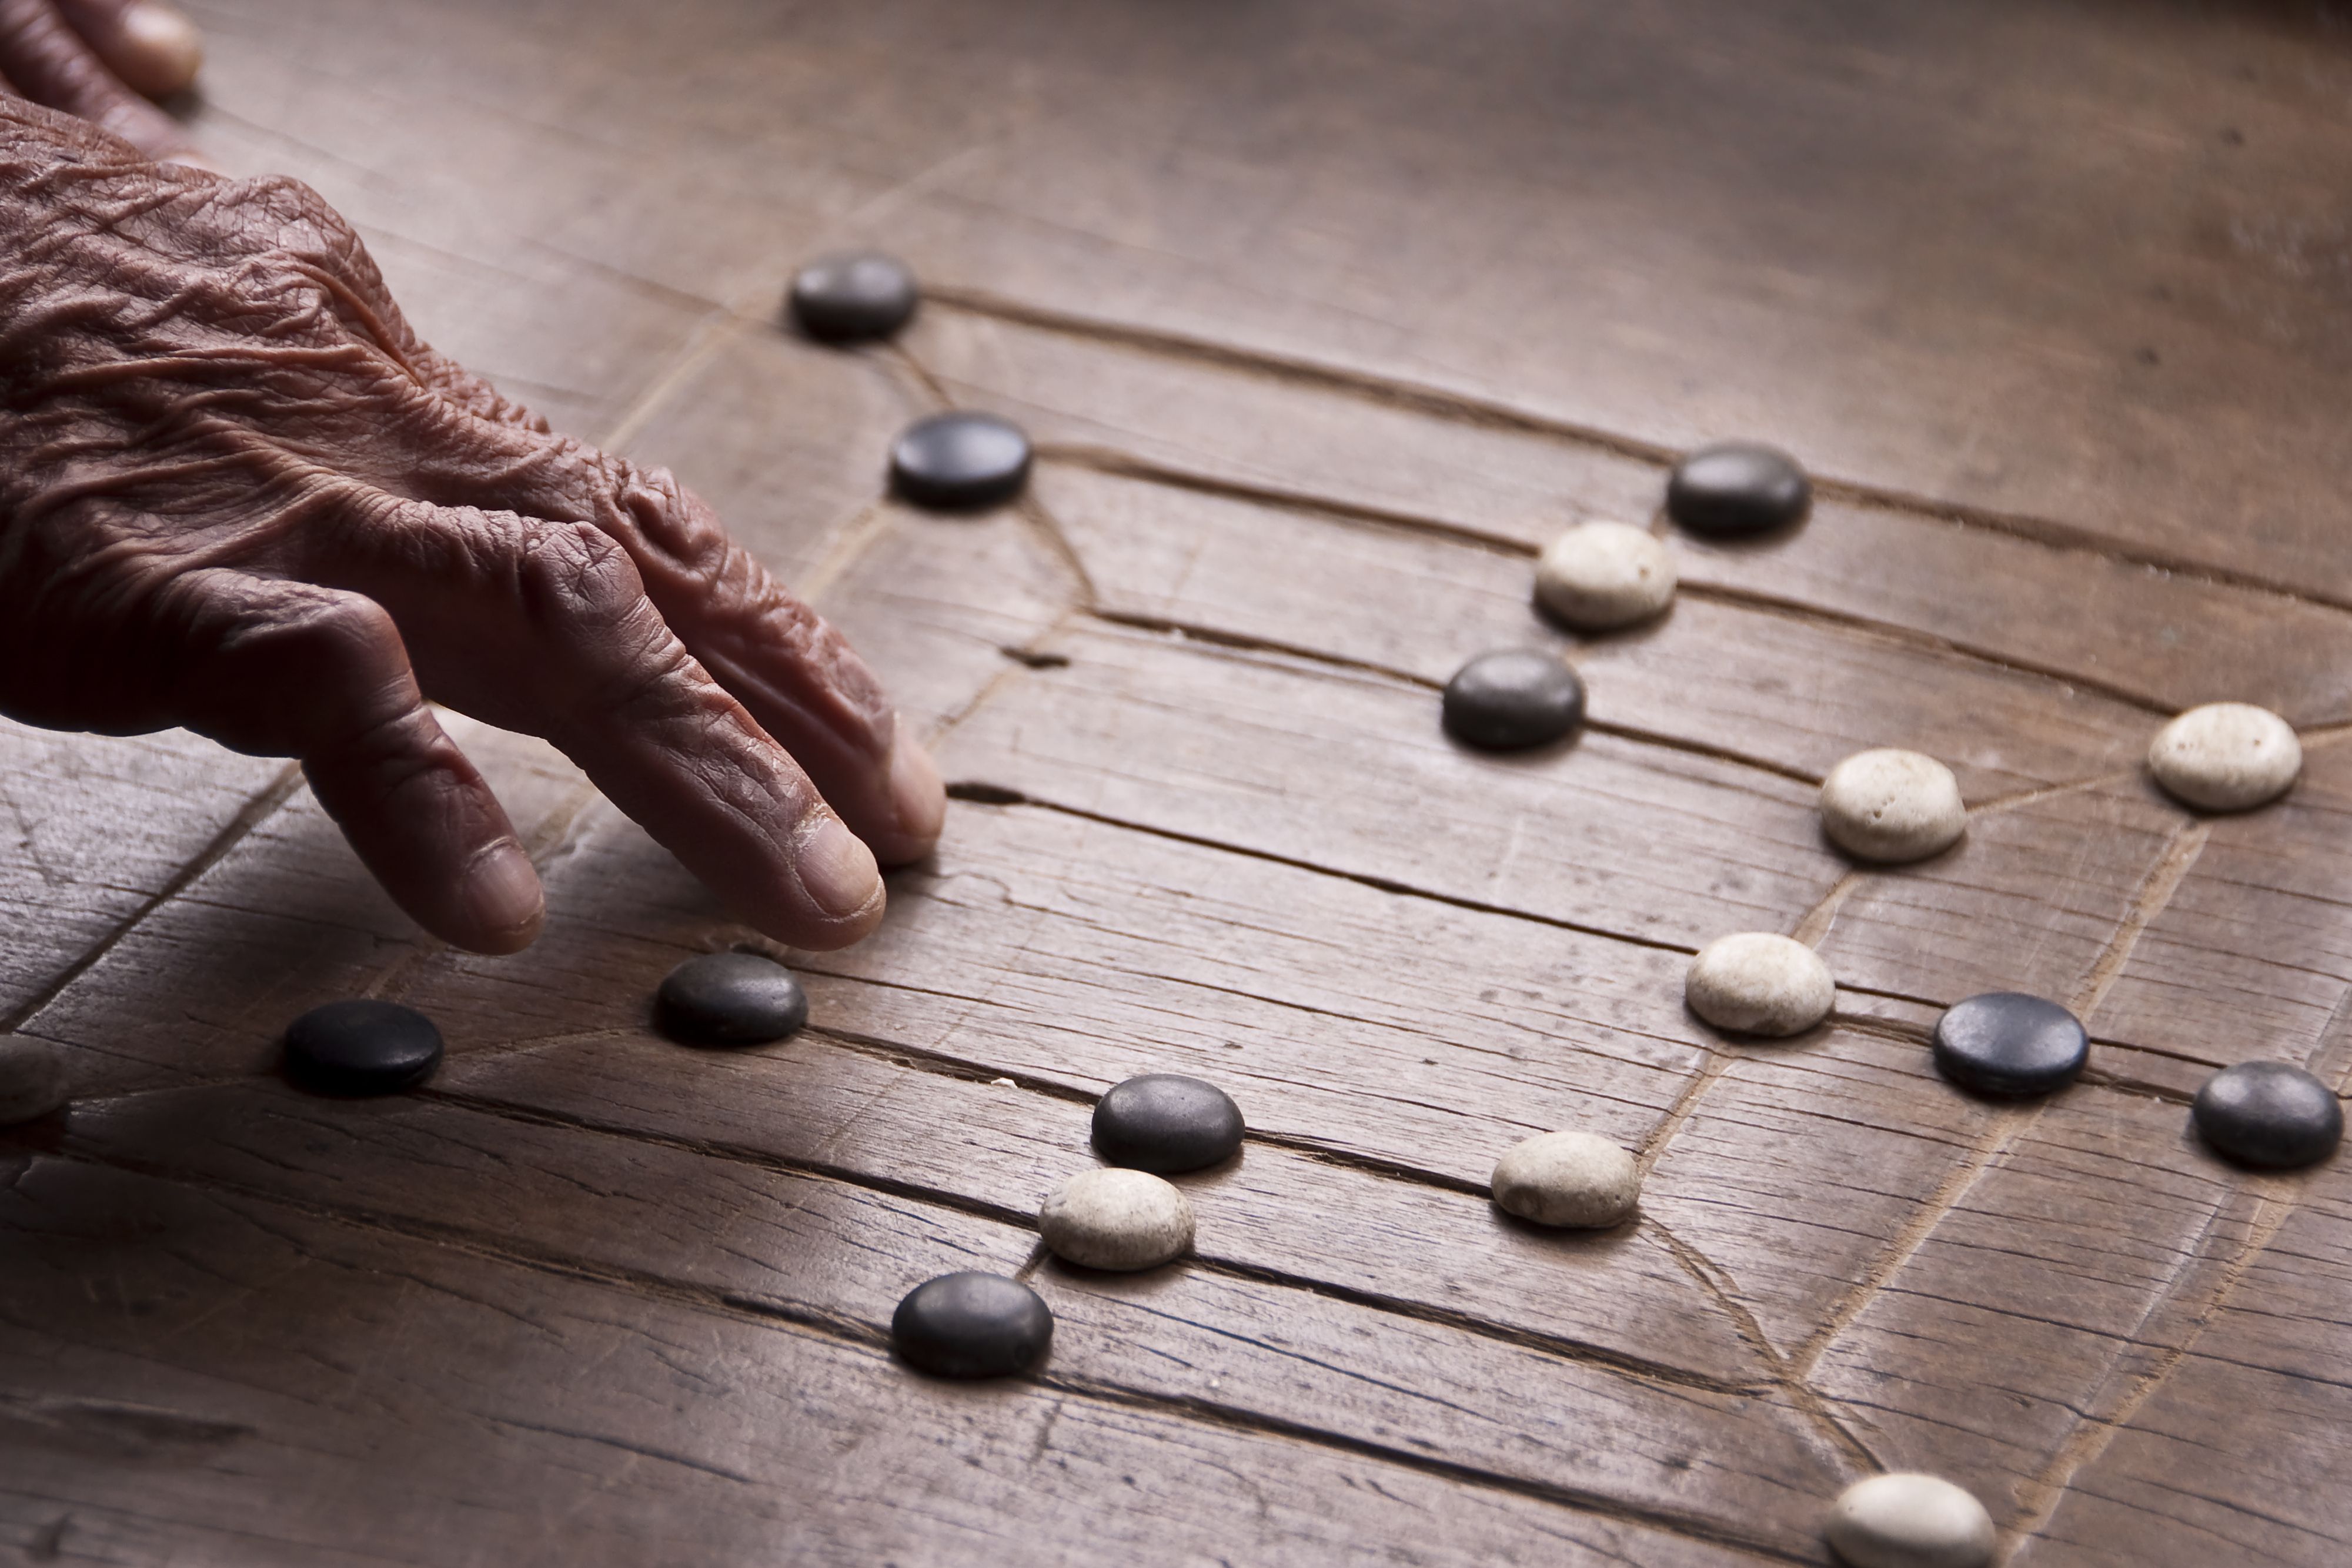 An old manâ€™s hand reaches towards a worn morris board to move a piece.